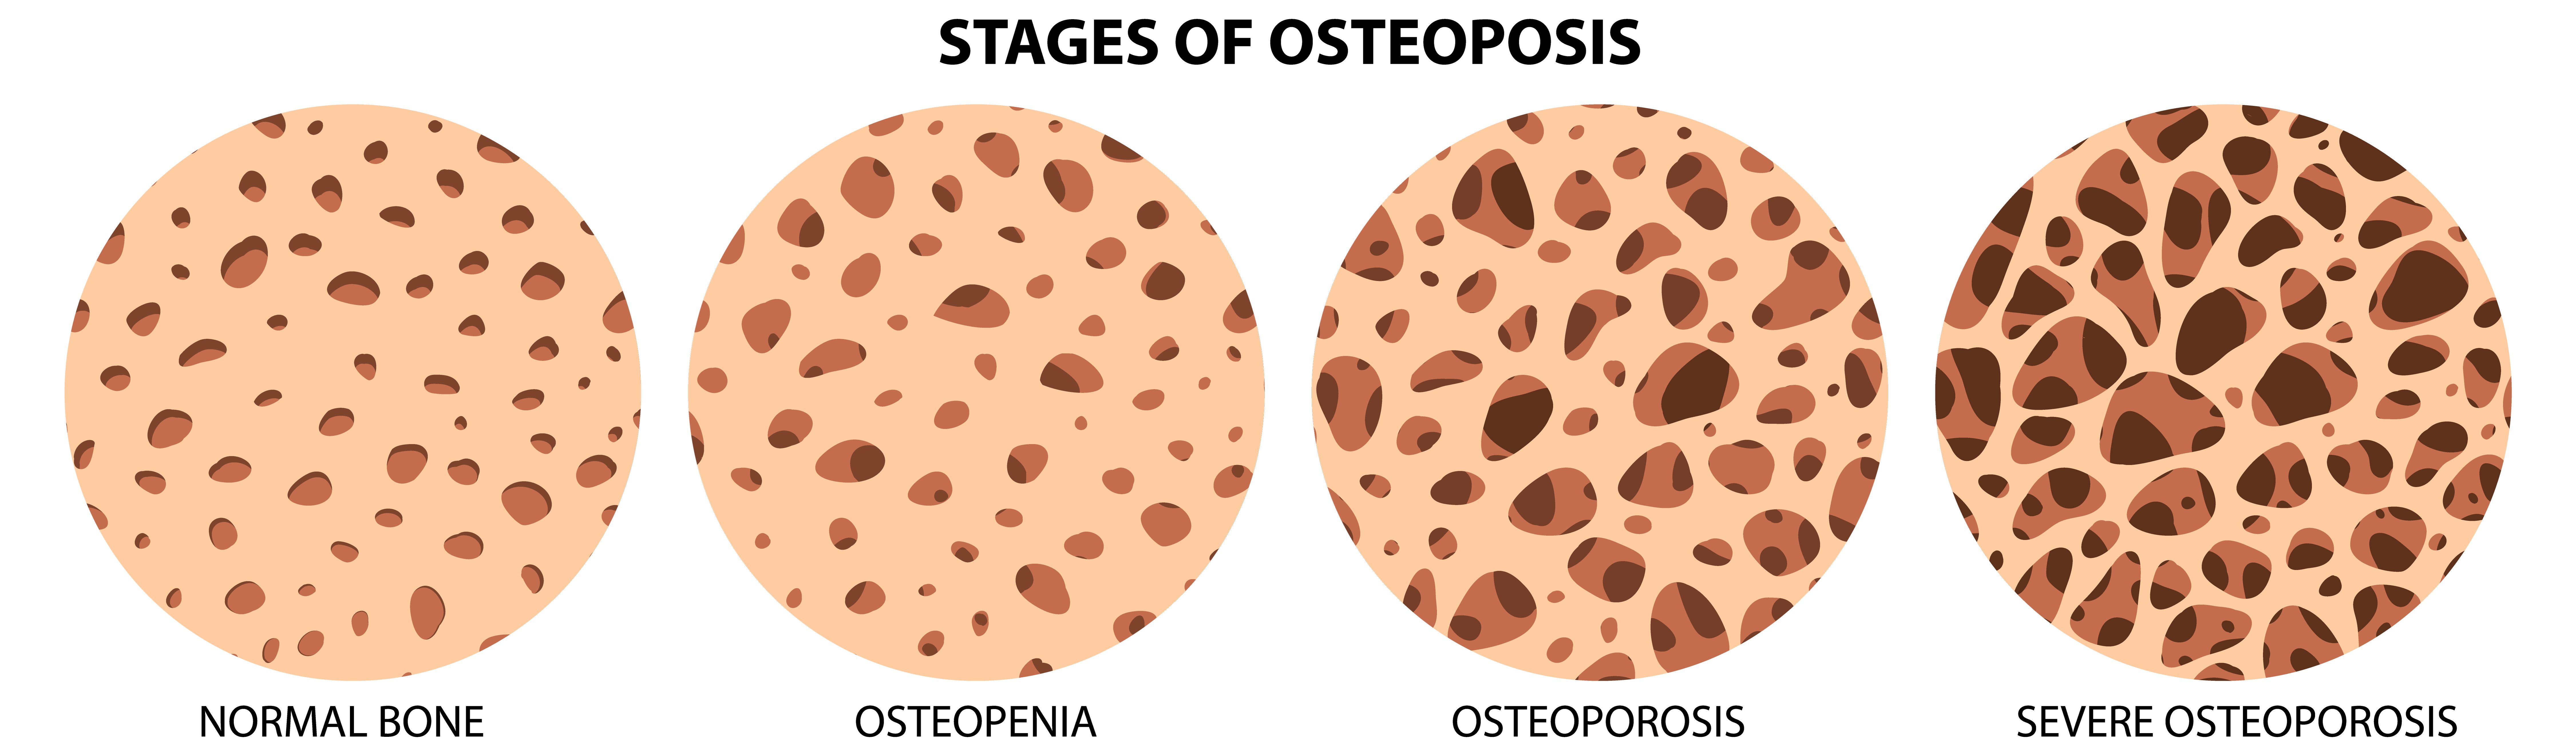 stages-osteoporosis-spinal-cord-sci-injury